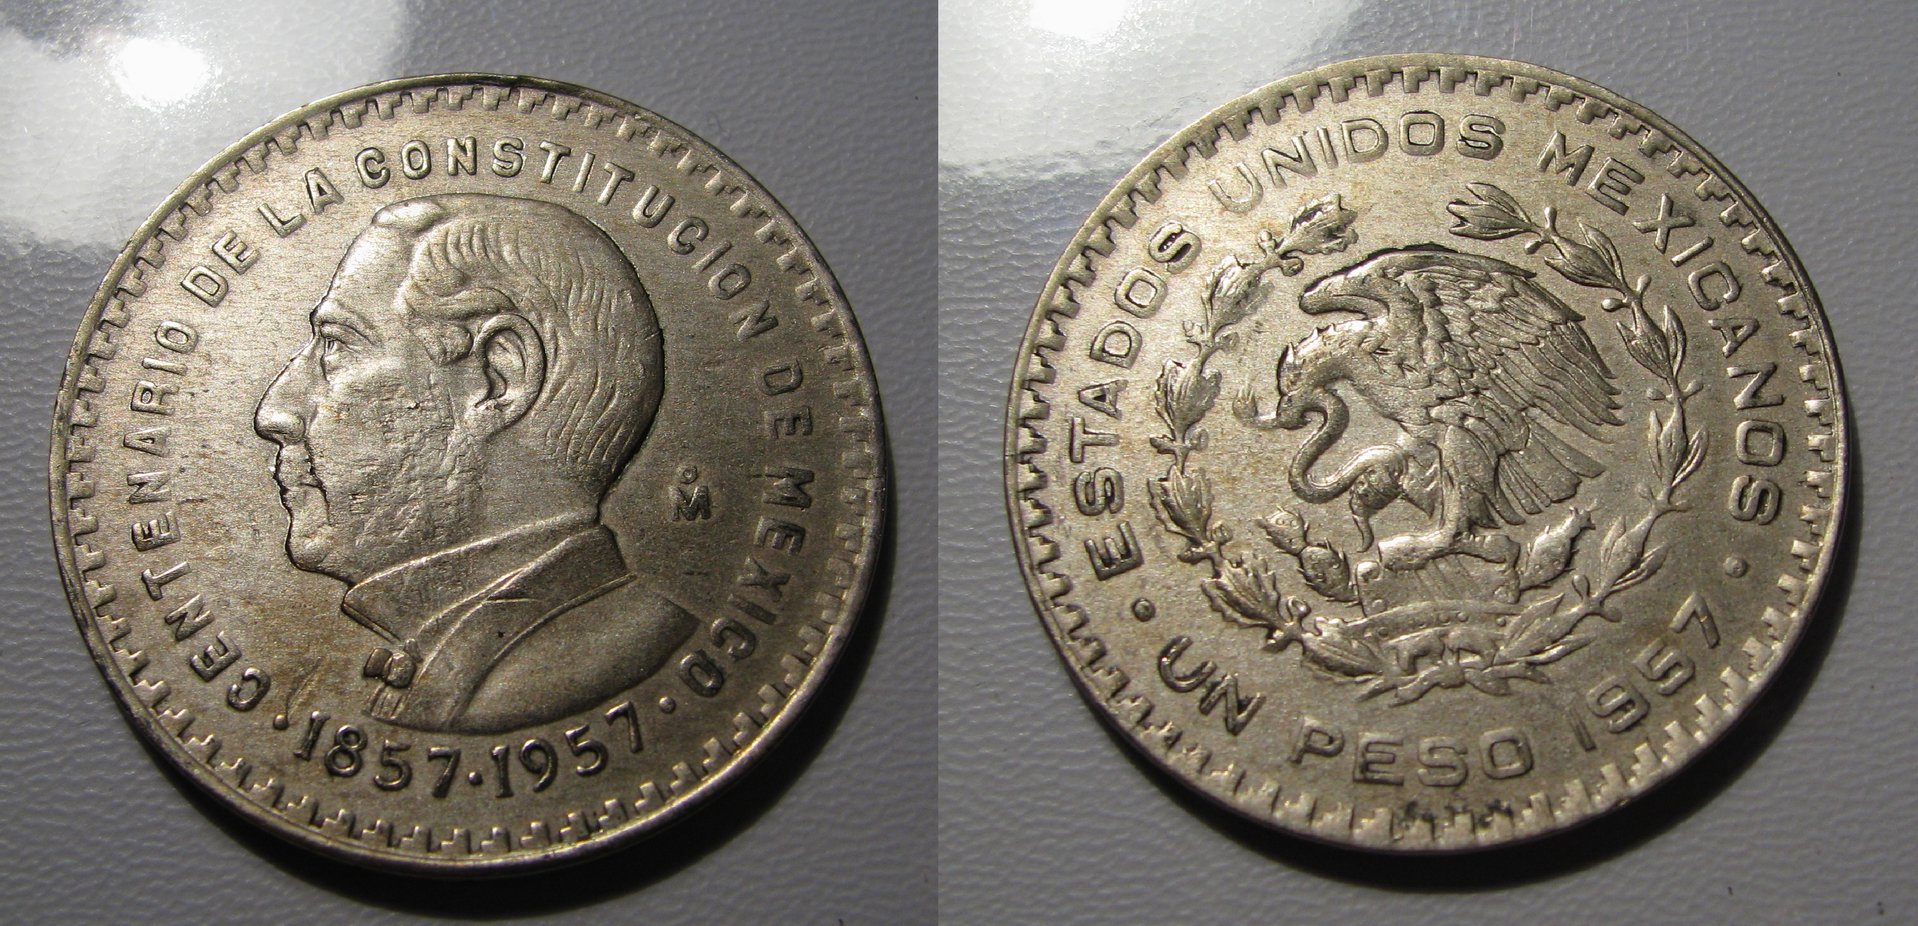 1957 Mexico 100th Anniversary Consitution Peso.jpg